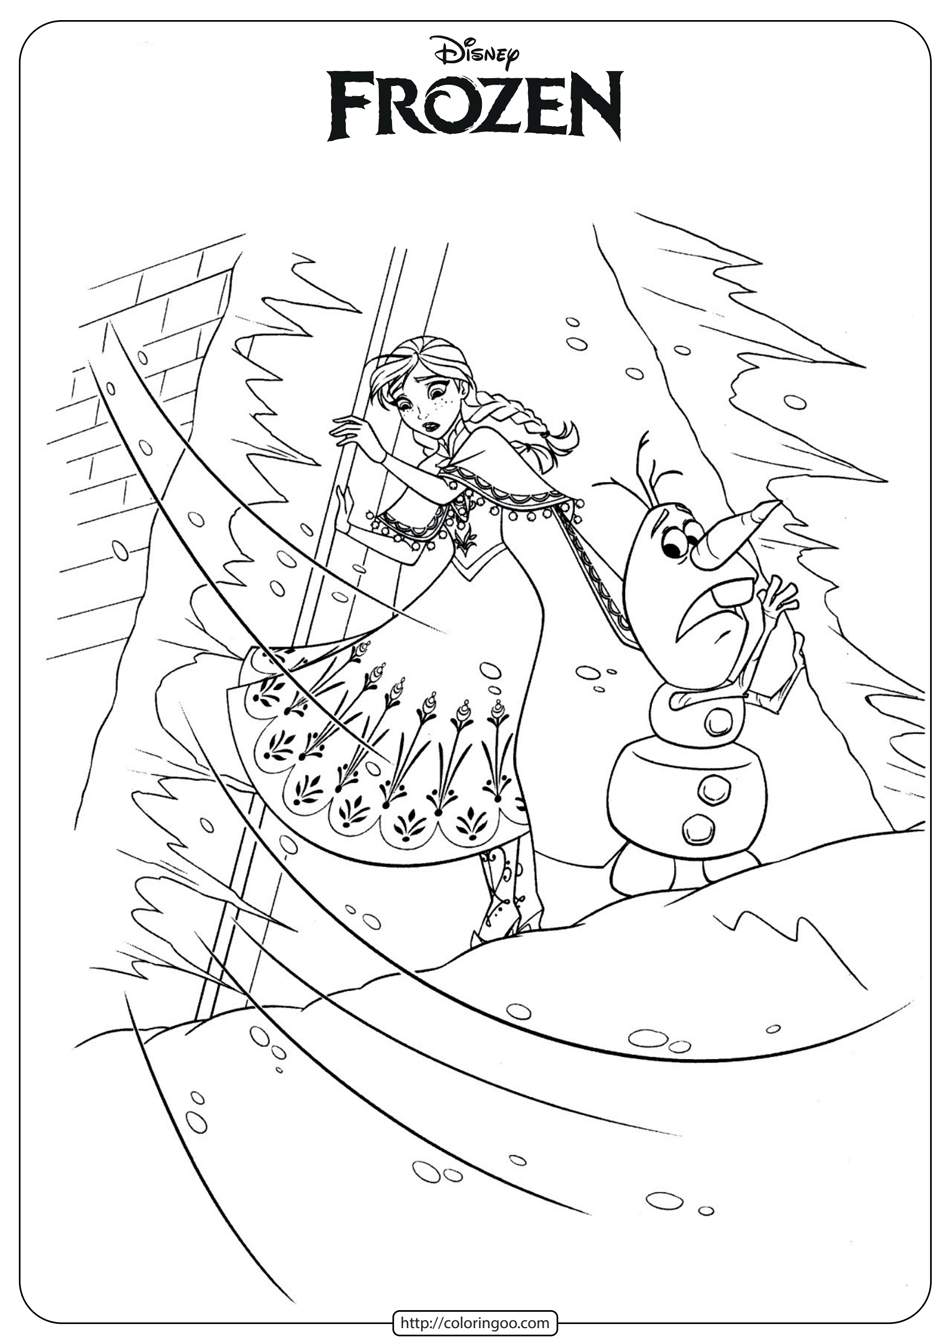 disney frozen anna olaf coloring pages